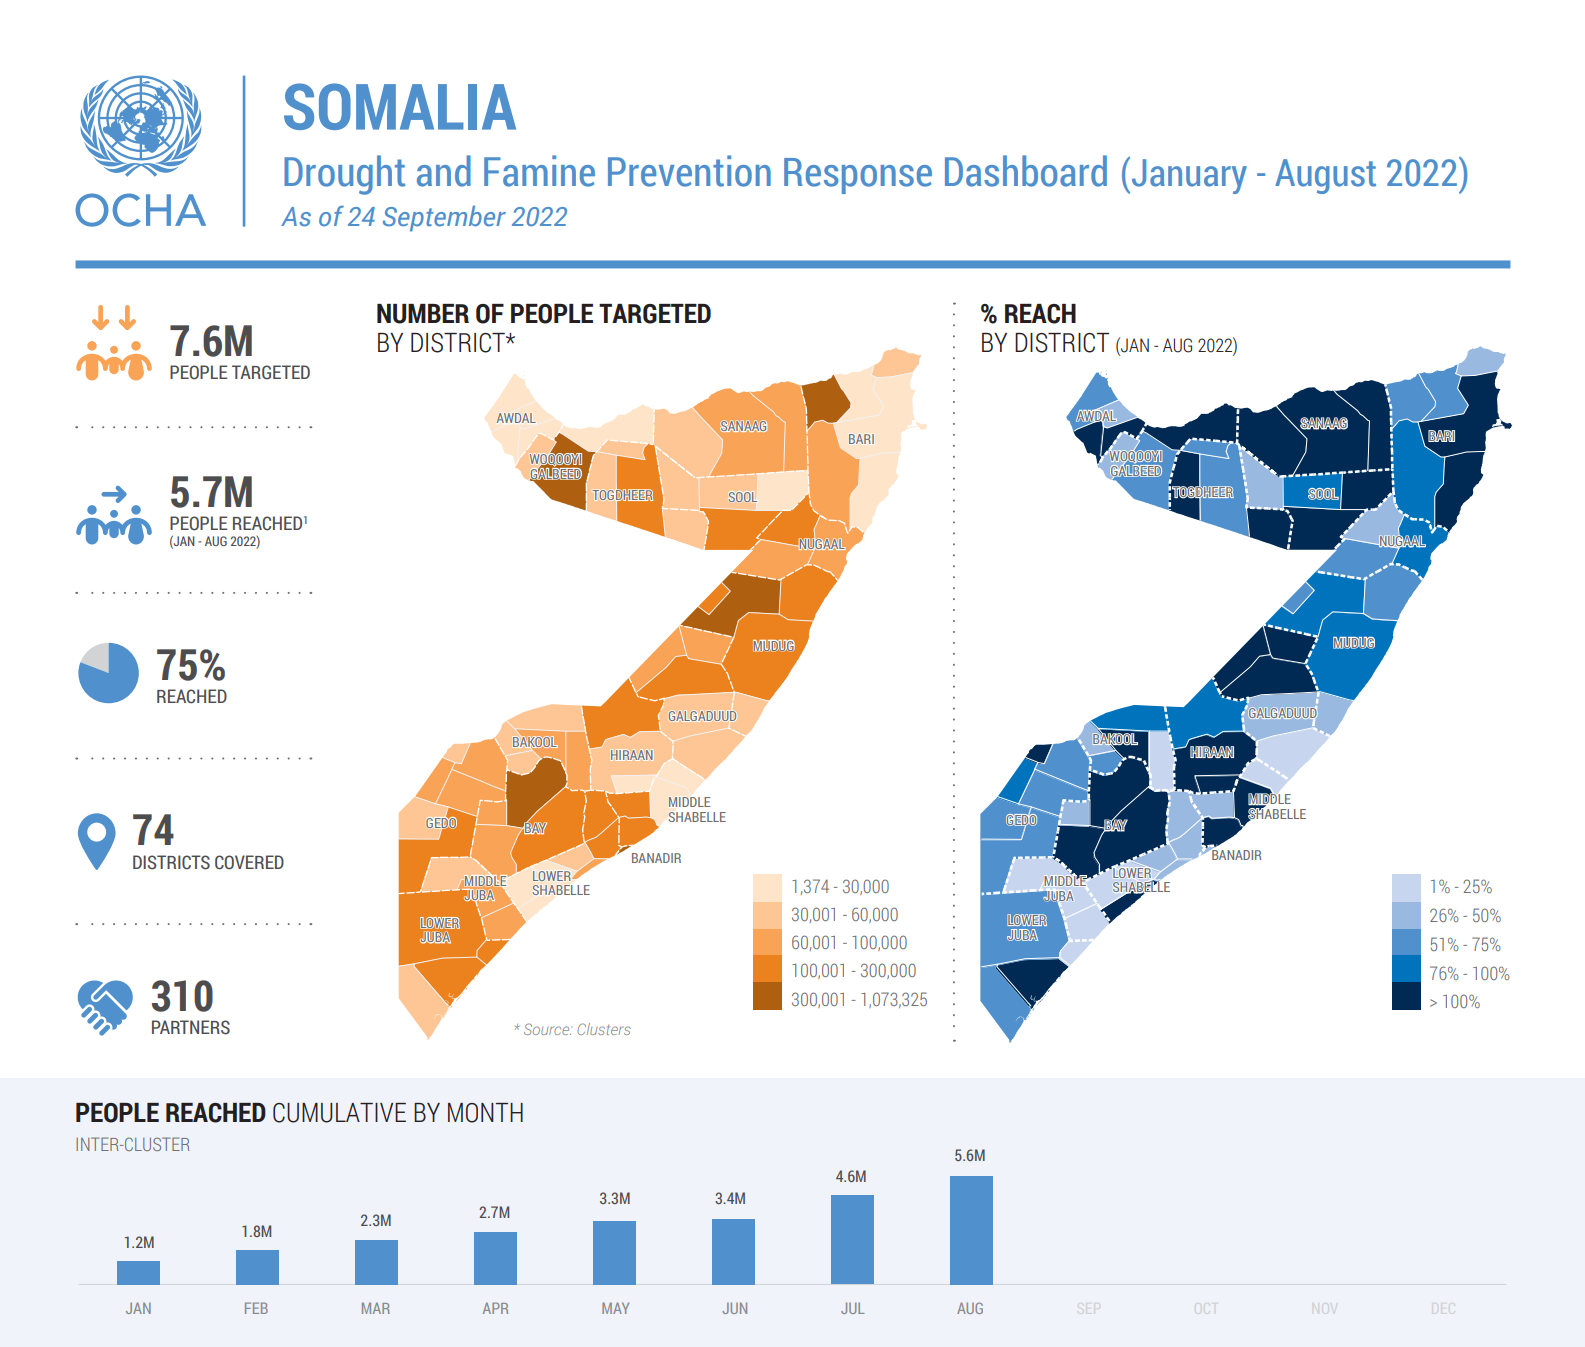 Drought and Famine Prevention Response Dashboard for Somalia, January 2022 - August 2022. Graphic: OCHA